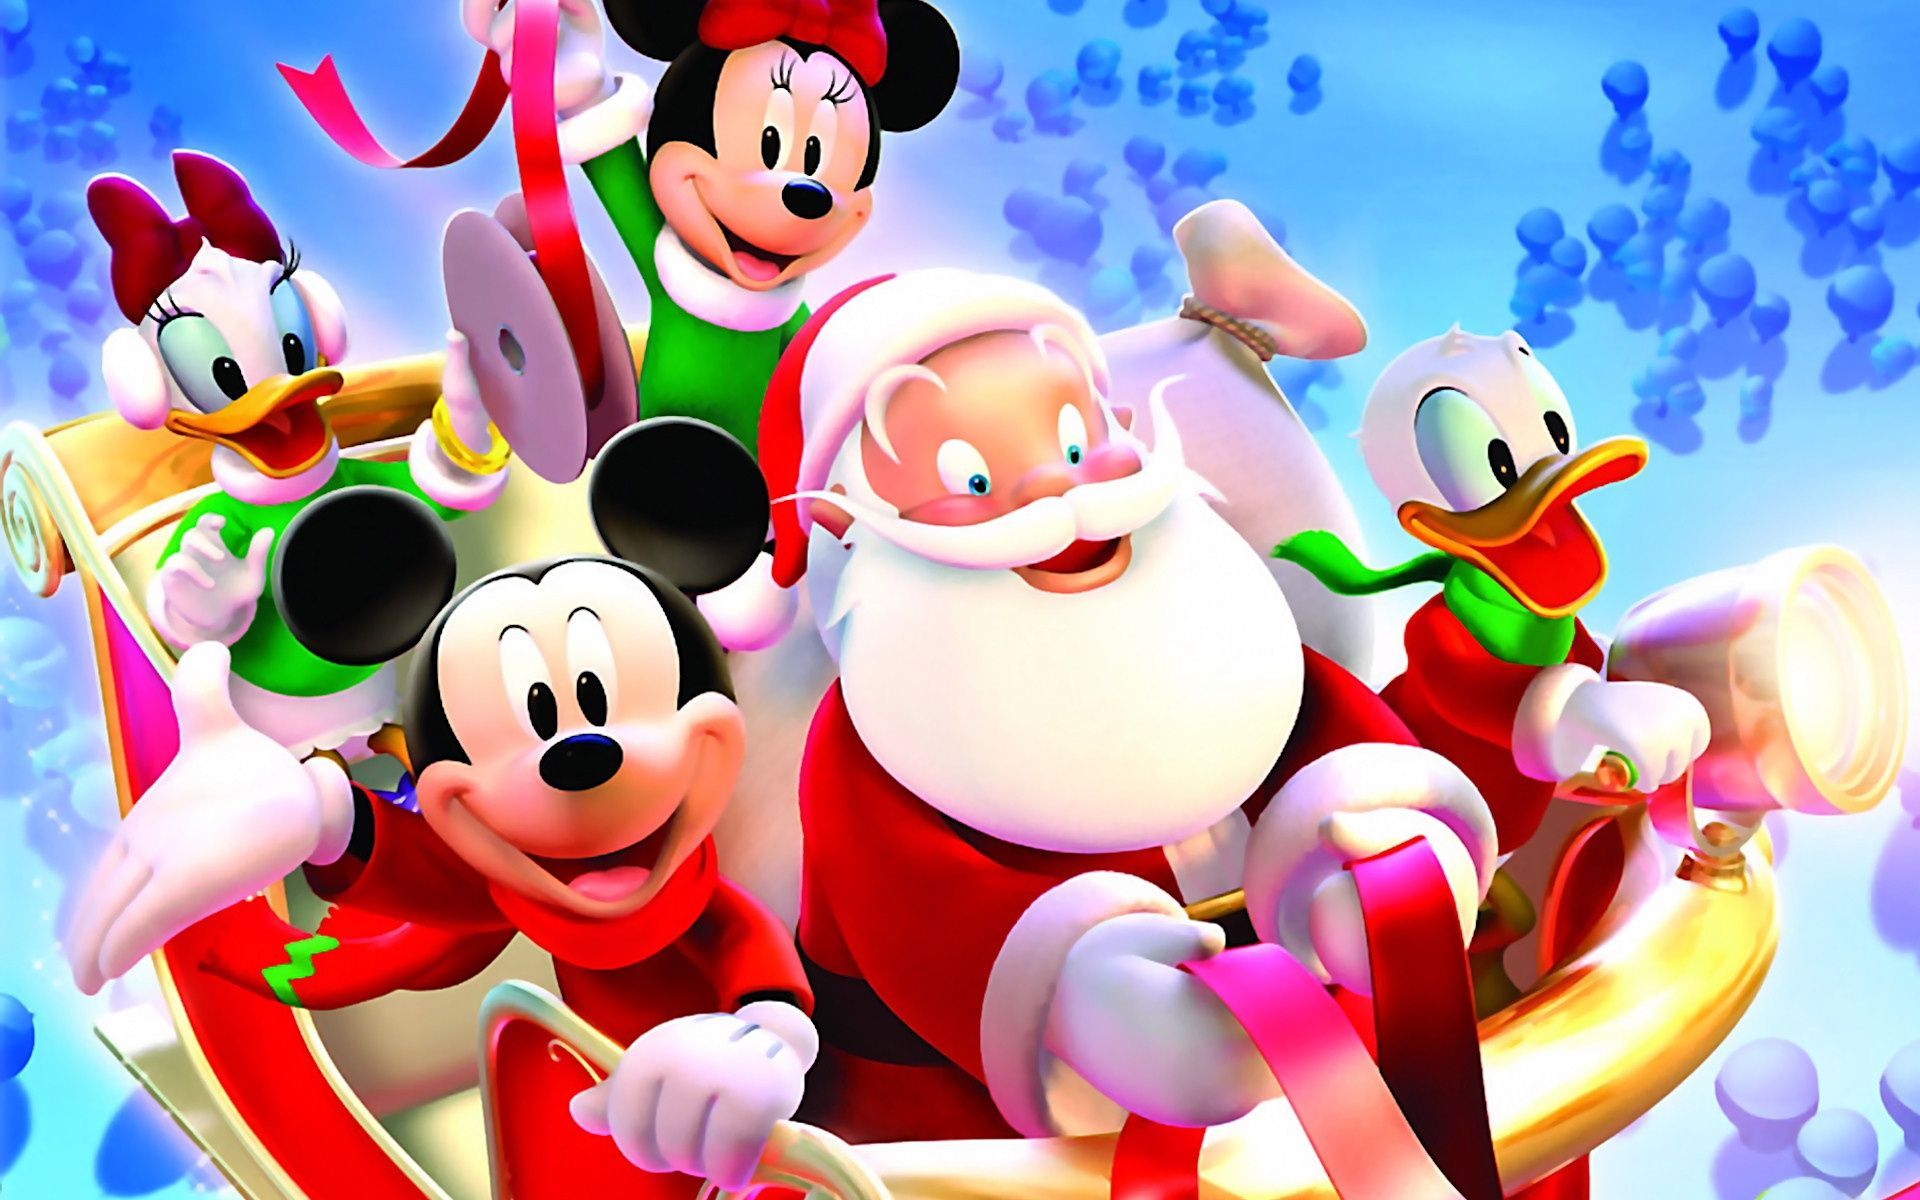 Disney christmas wallpapers hd mickey mouse with santa claus